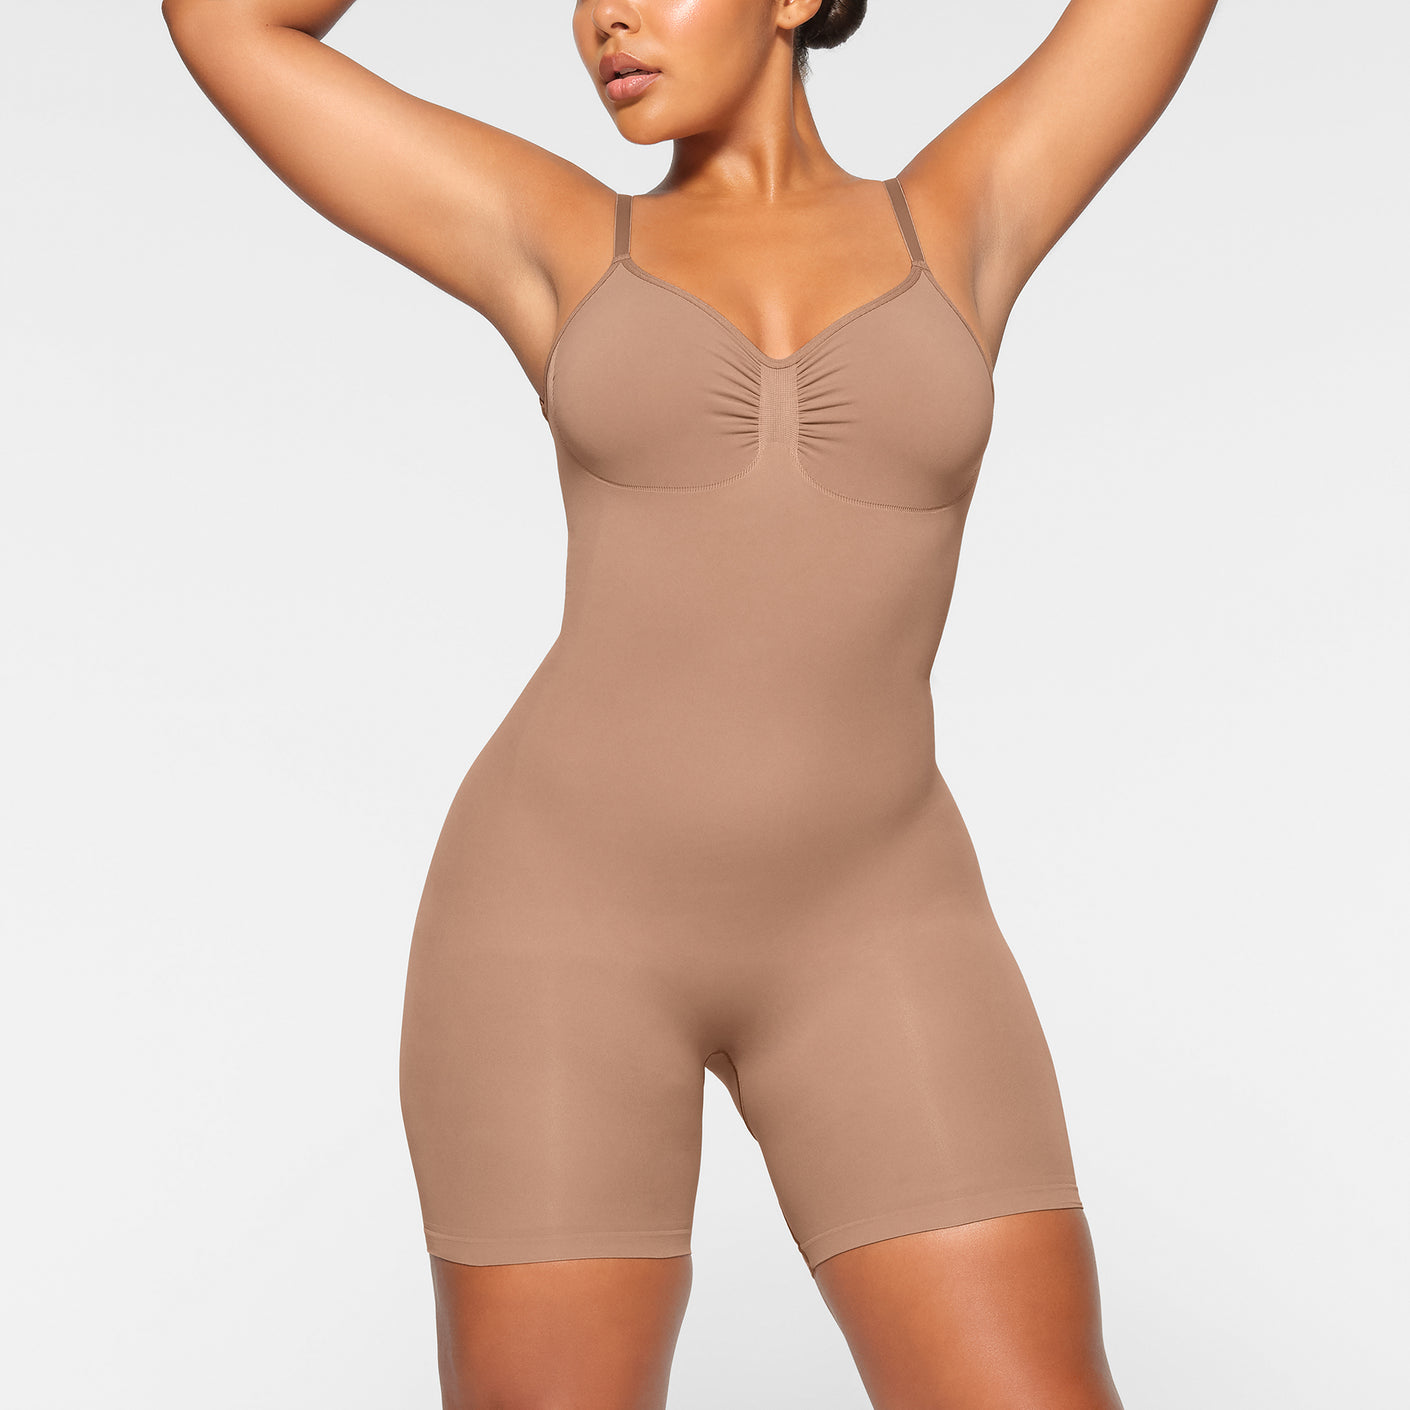 Track Barely There Low Back Short - Sienna - XL at Skims